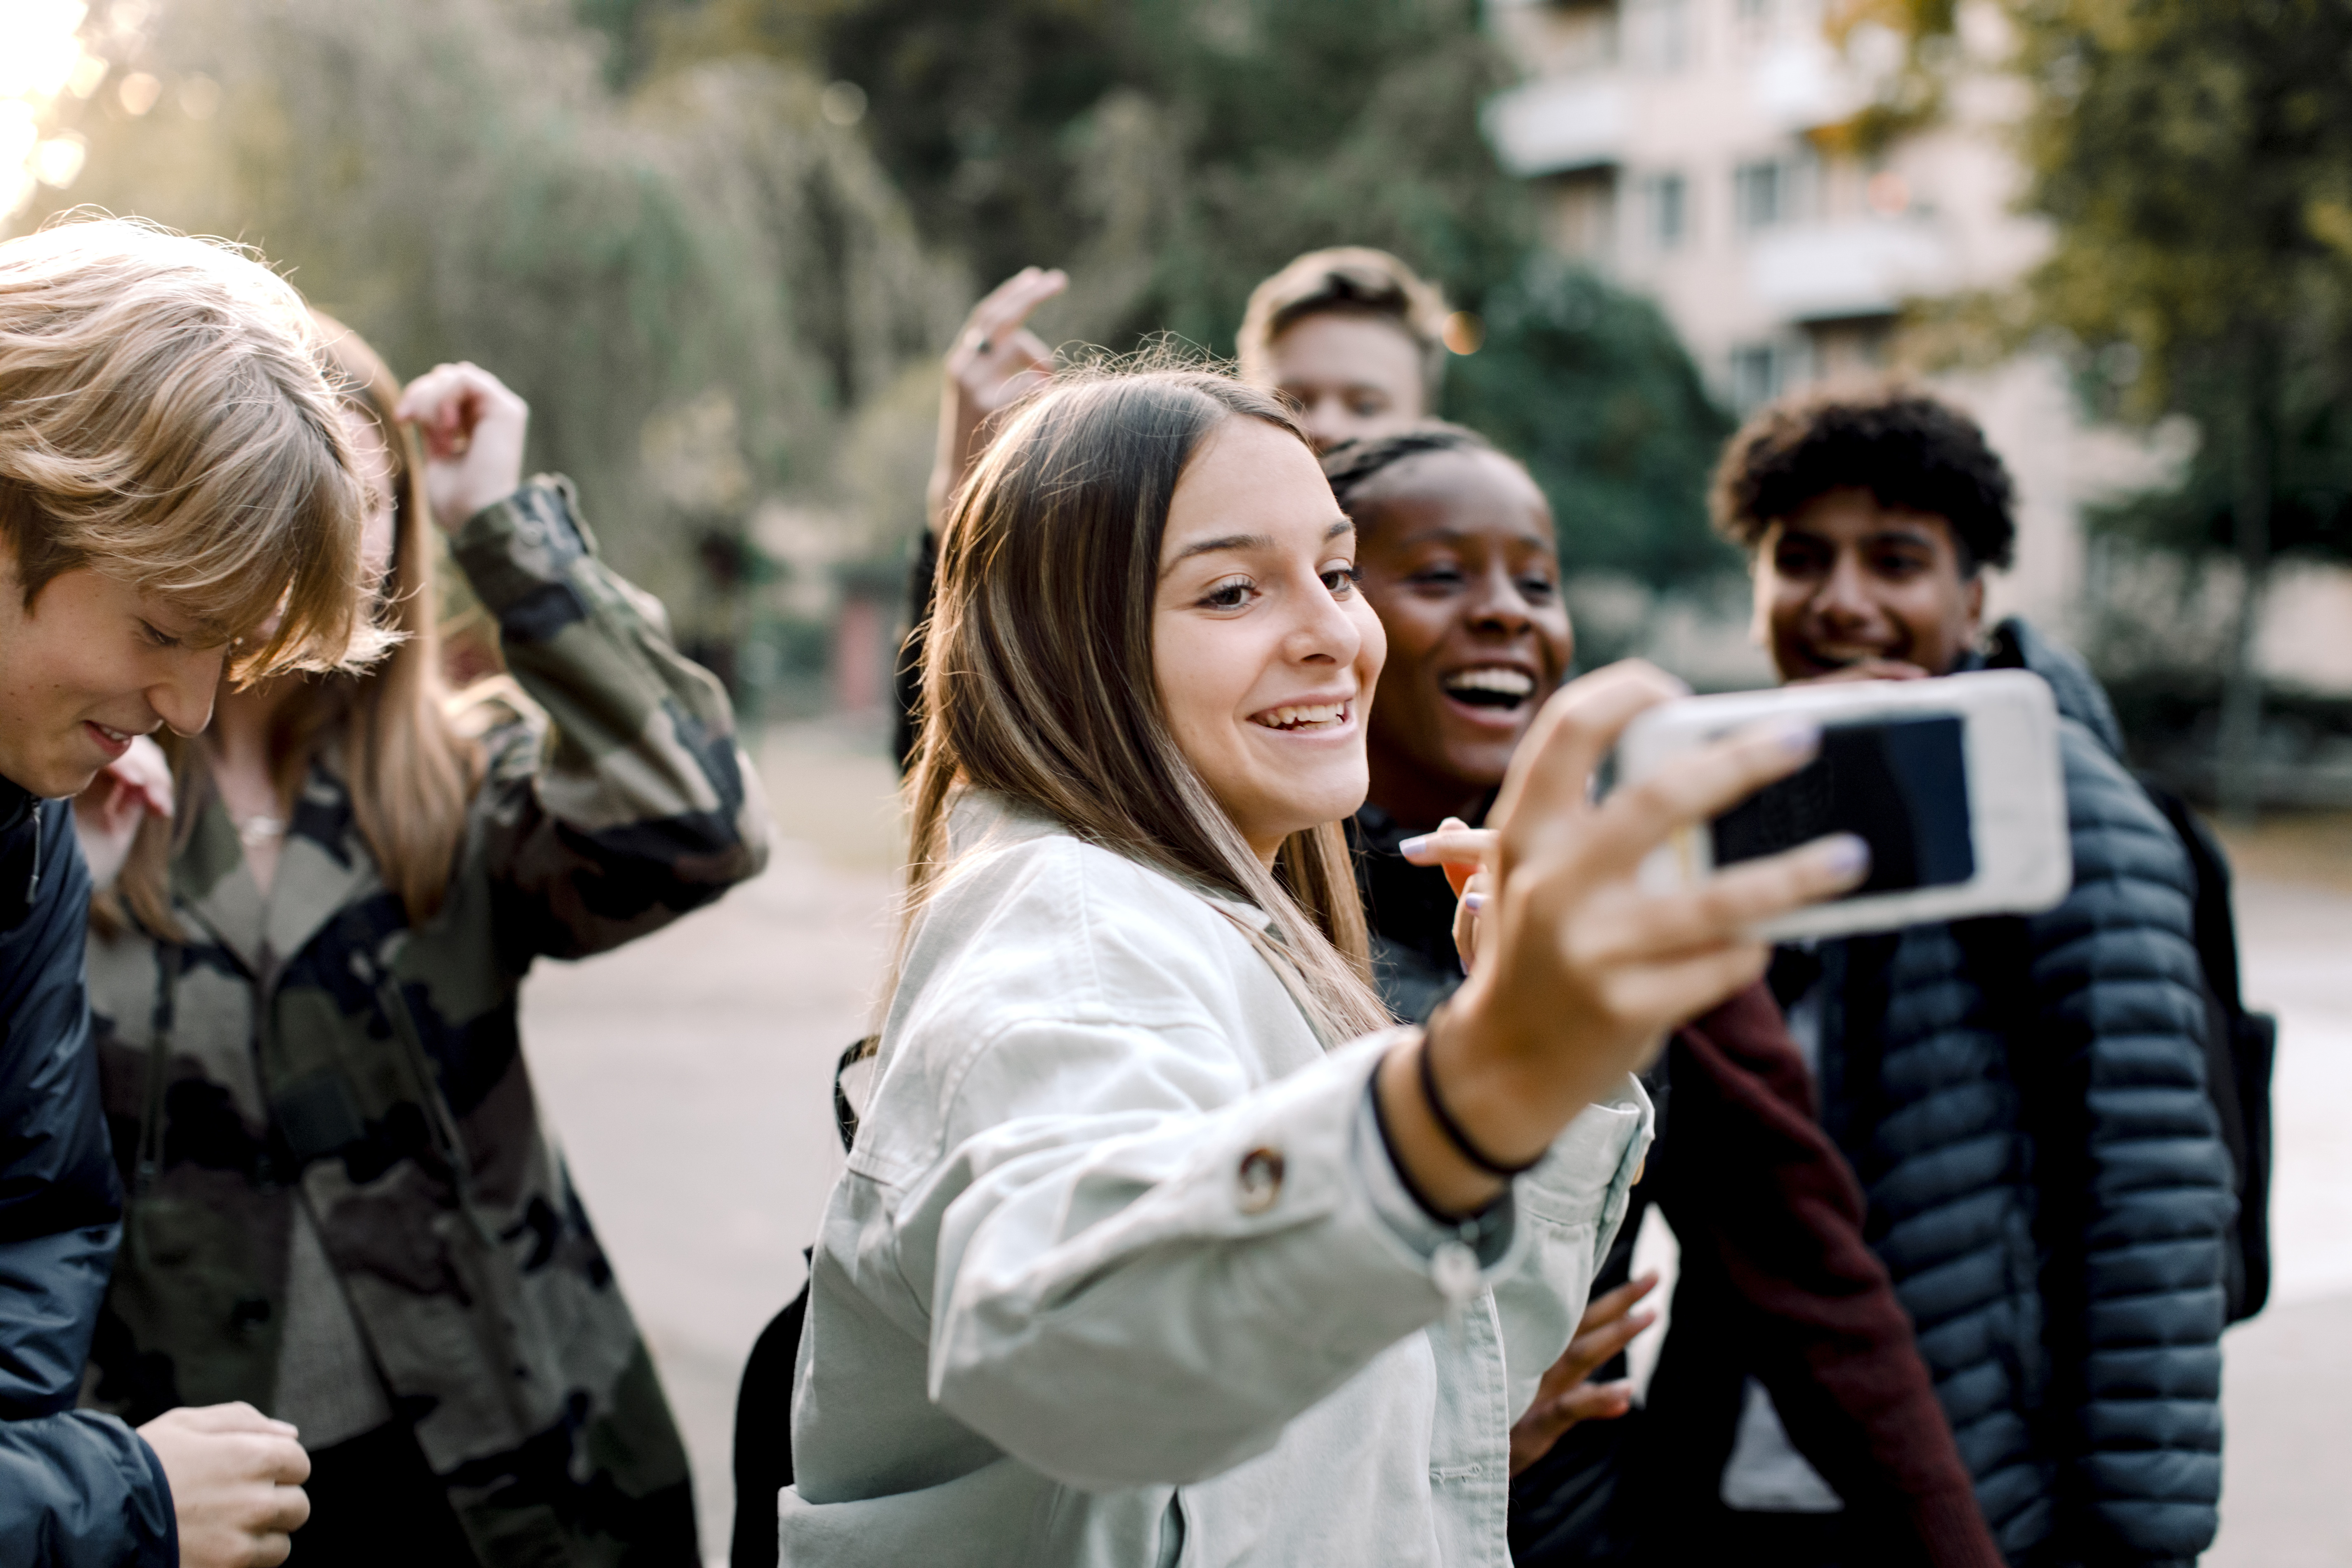 Young people looking happy with phone GettyImages-1241442931.jpg